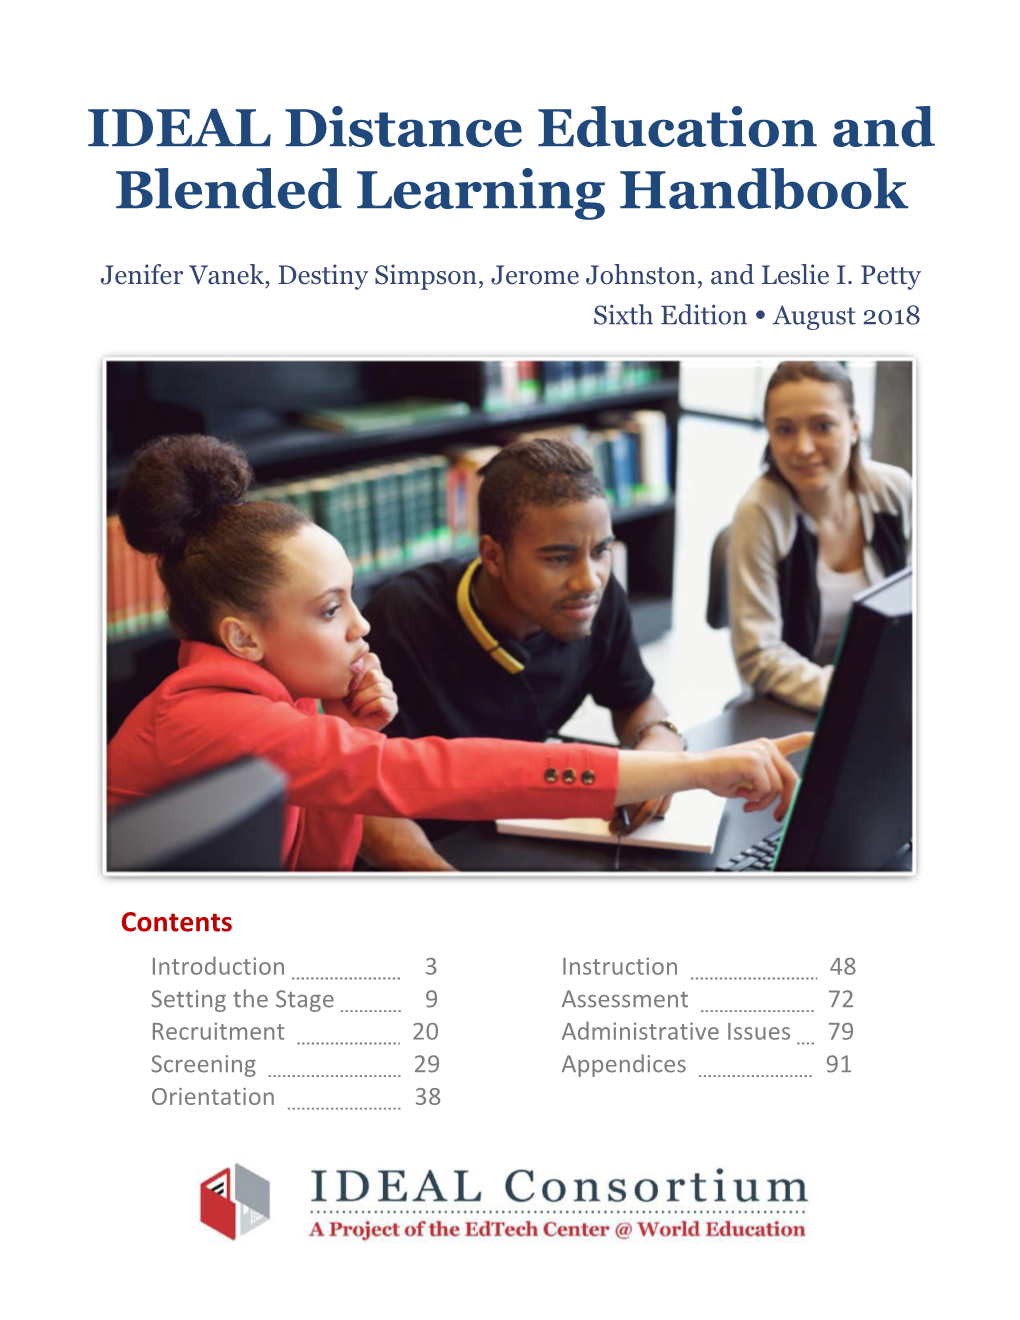 IDEAL Distance Education and Blended Learning Handbook, IDEAL Consortium 2018 1